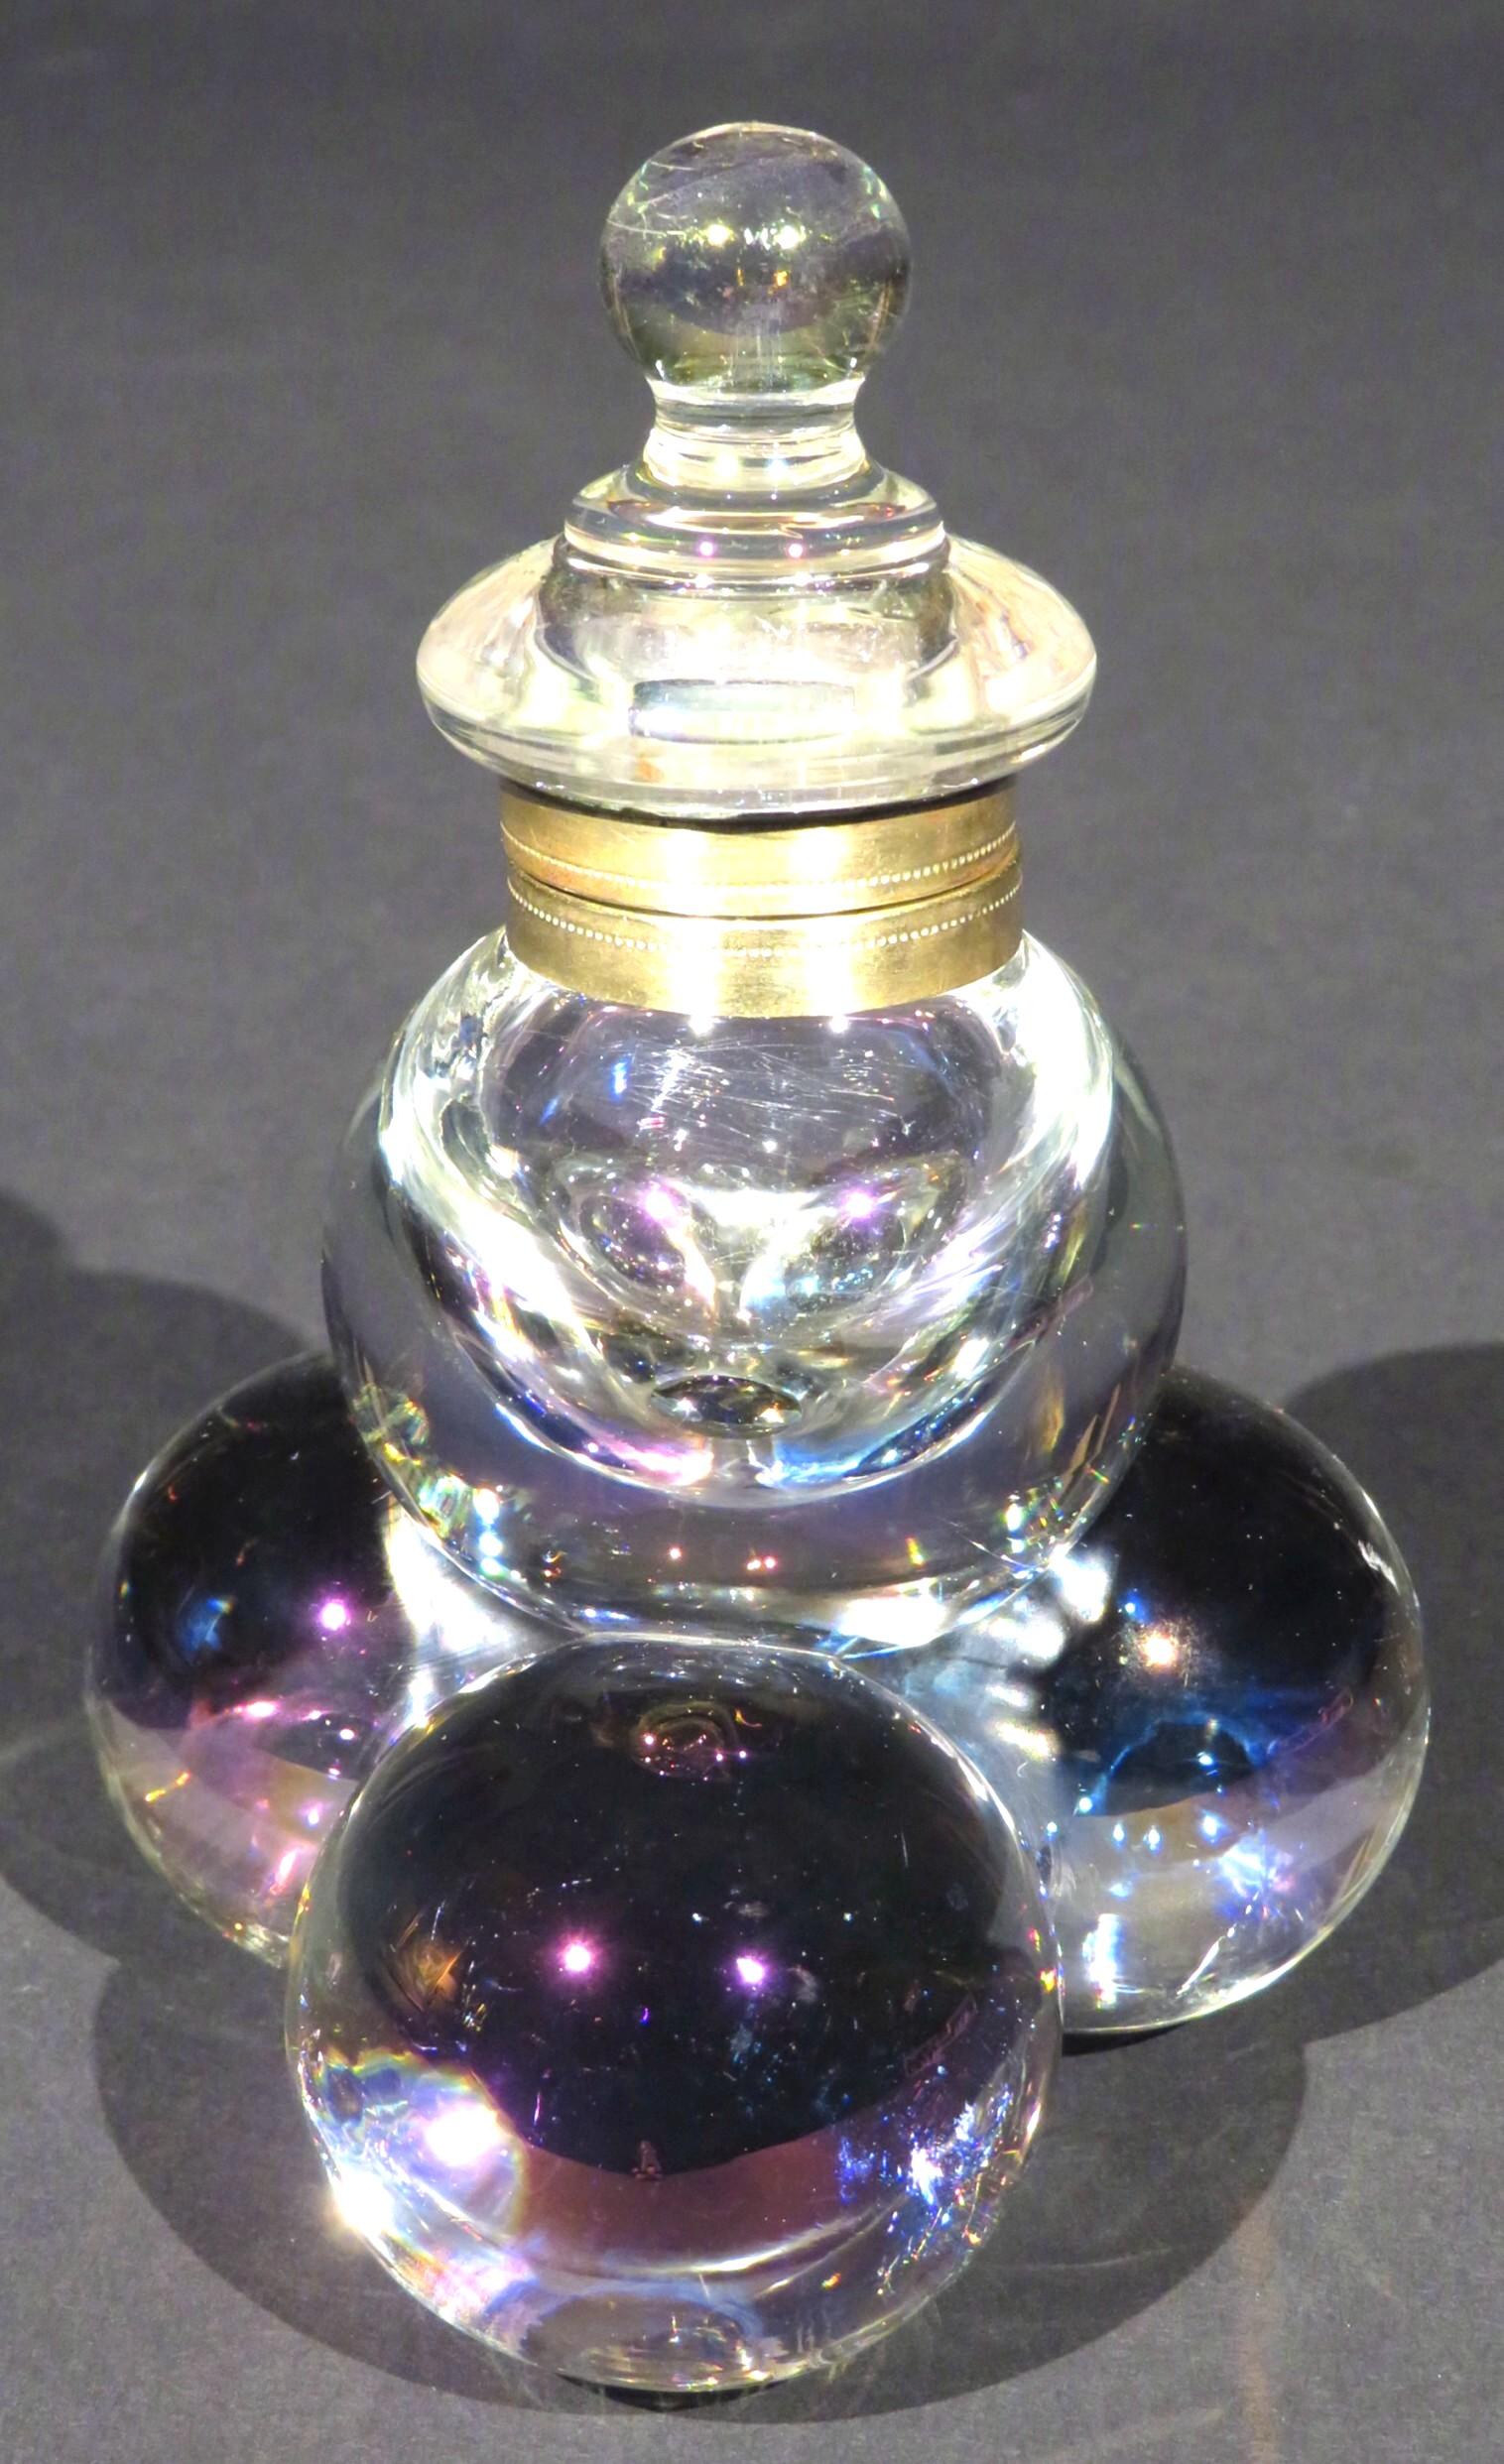 The hinged top fitted with brass mounts to a spherical well, raised atop a trio of smaller spherical supports all having a subtle iridescent quality.

 